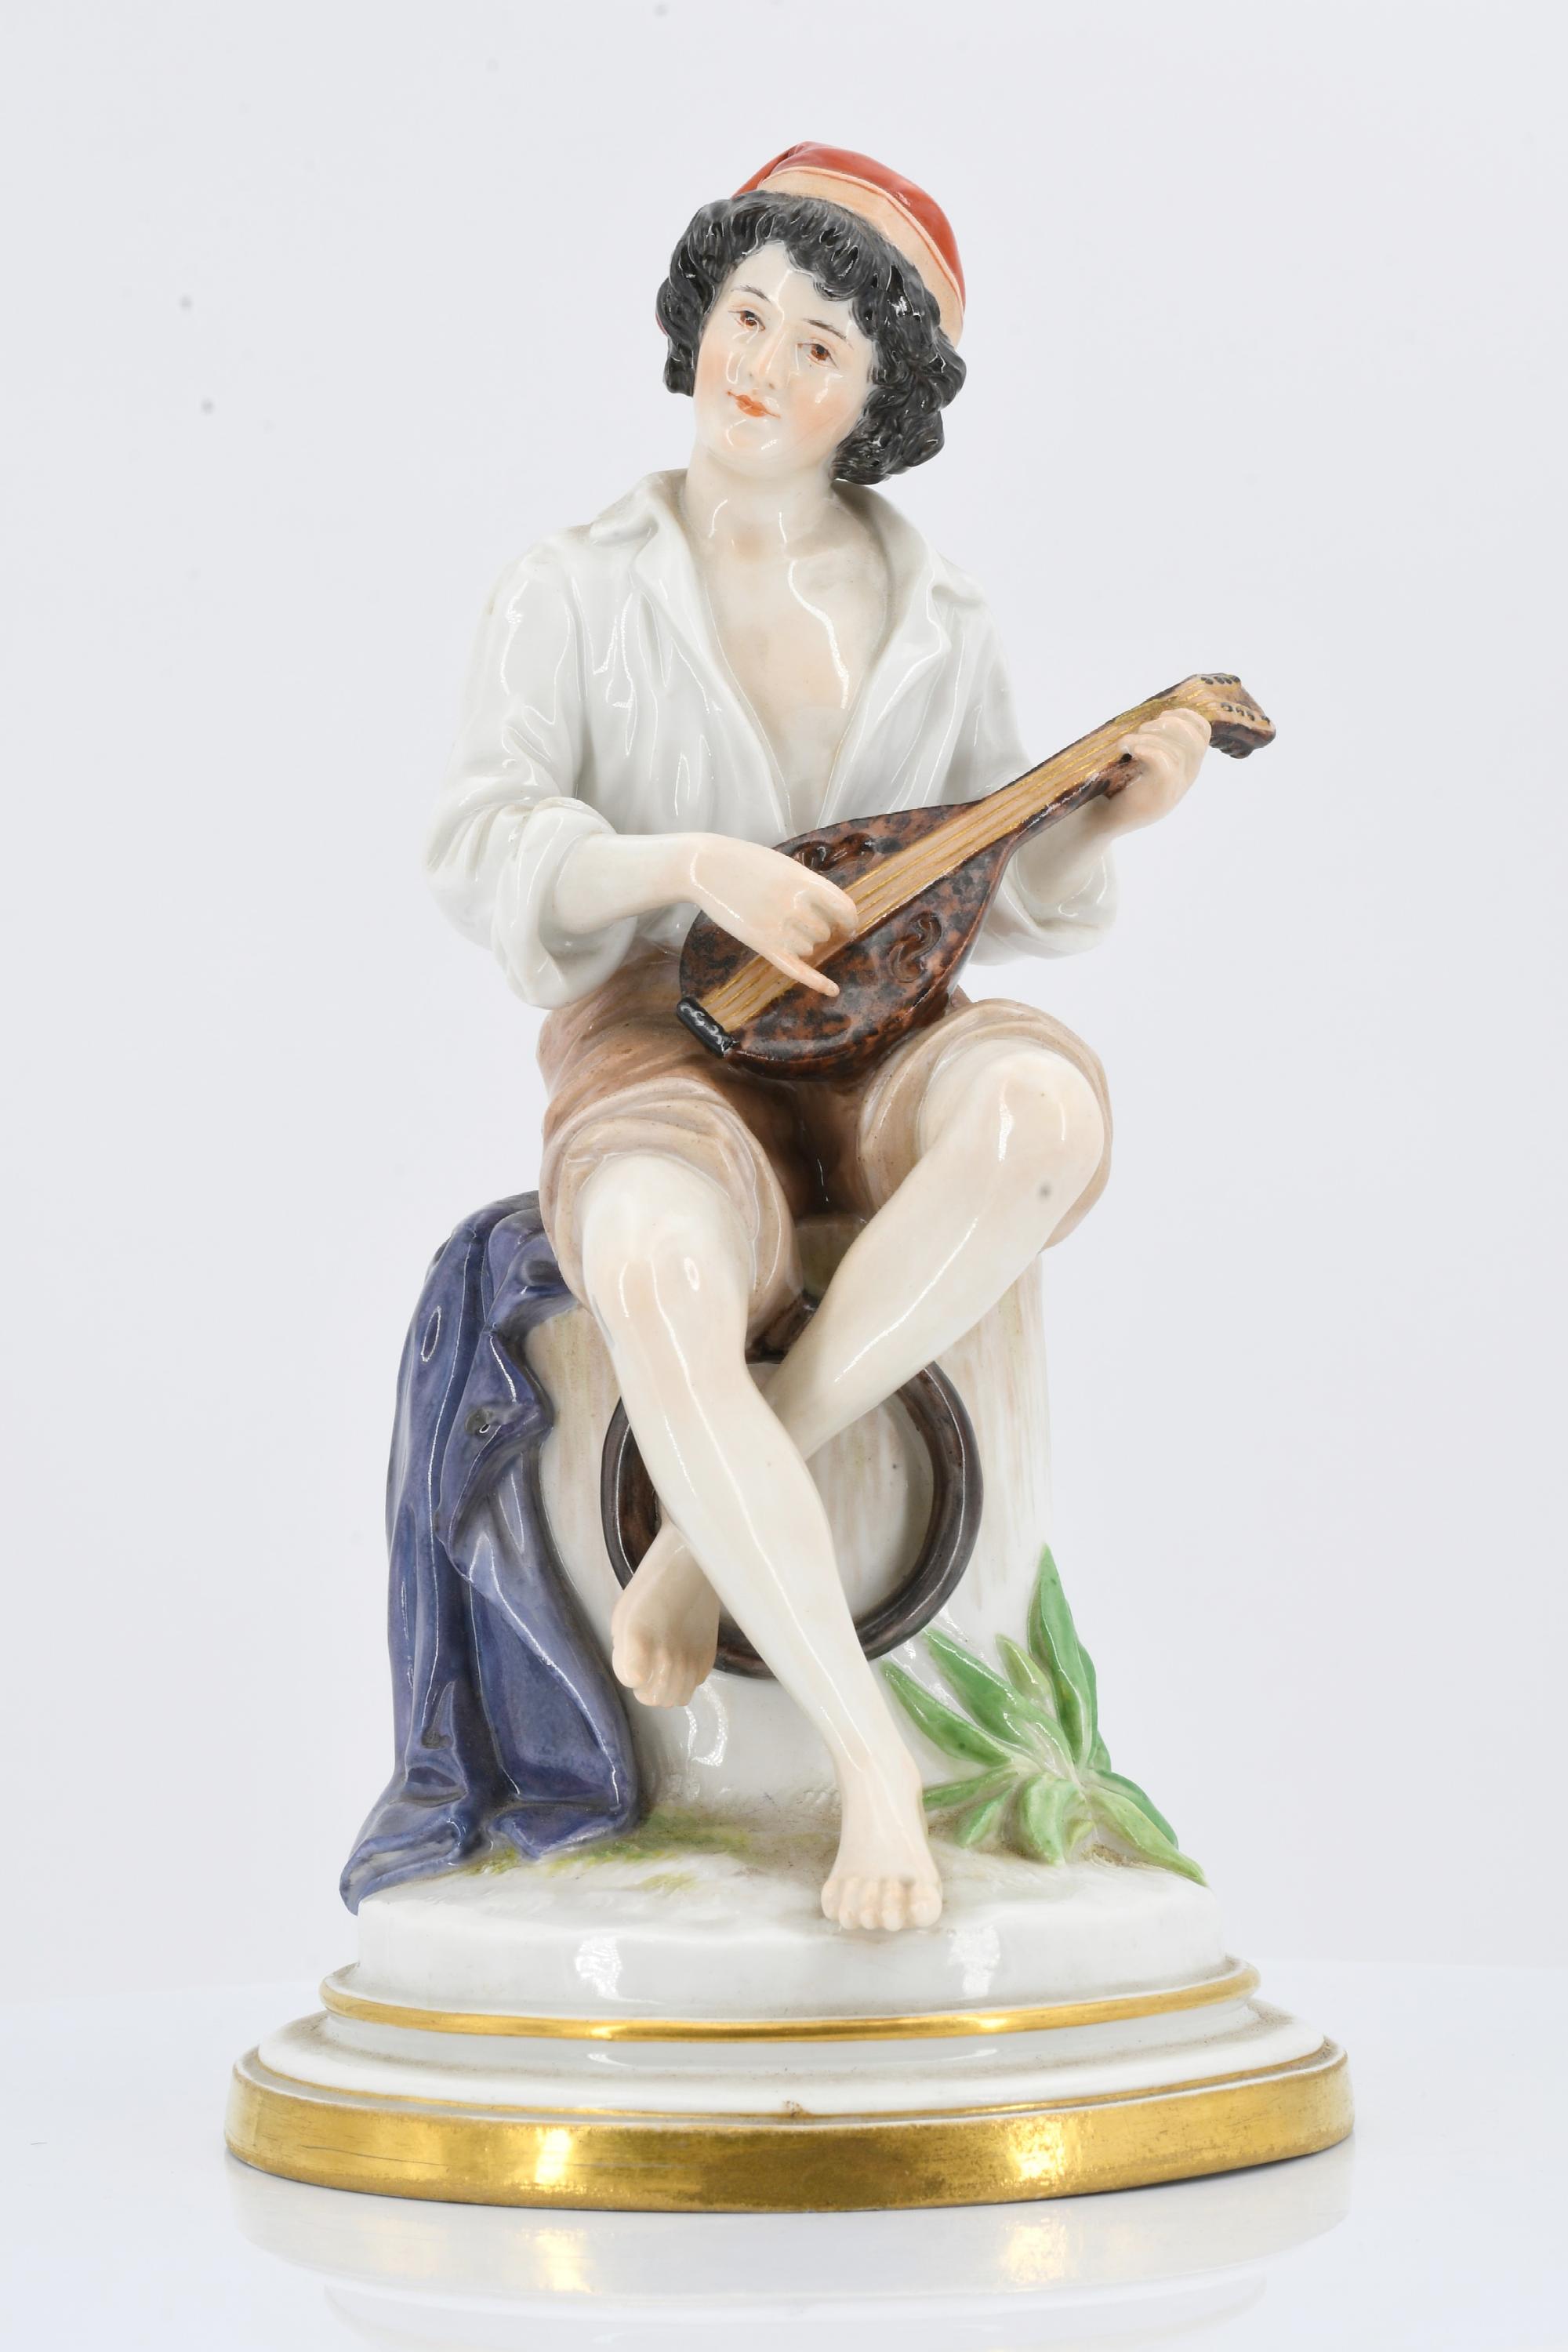 Lute player - Image 2 of 6